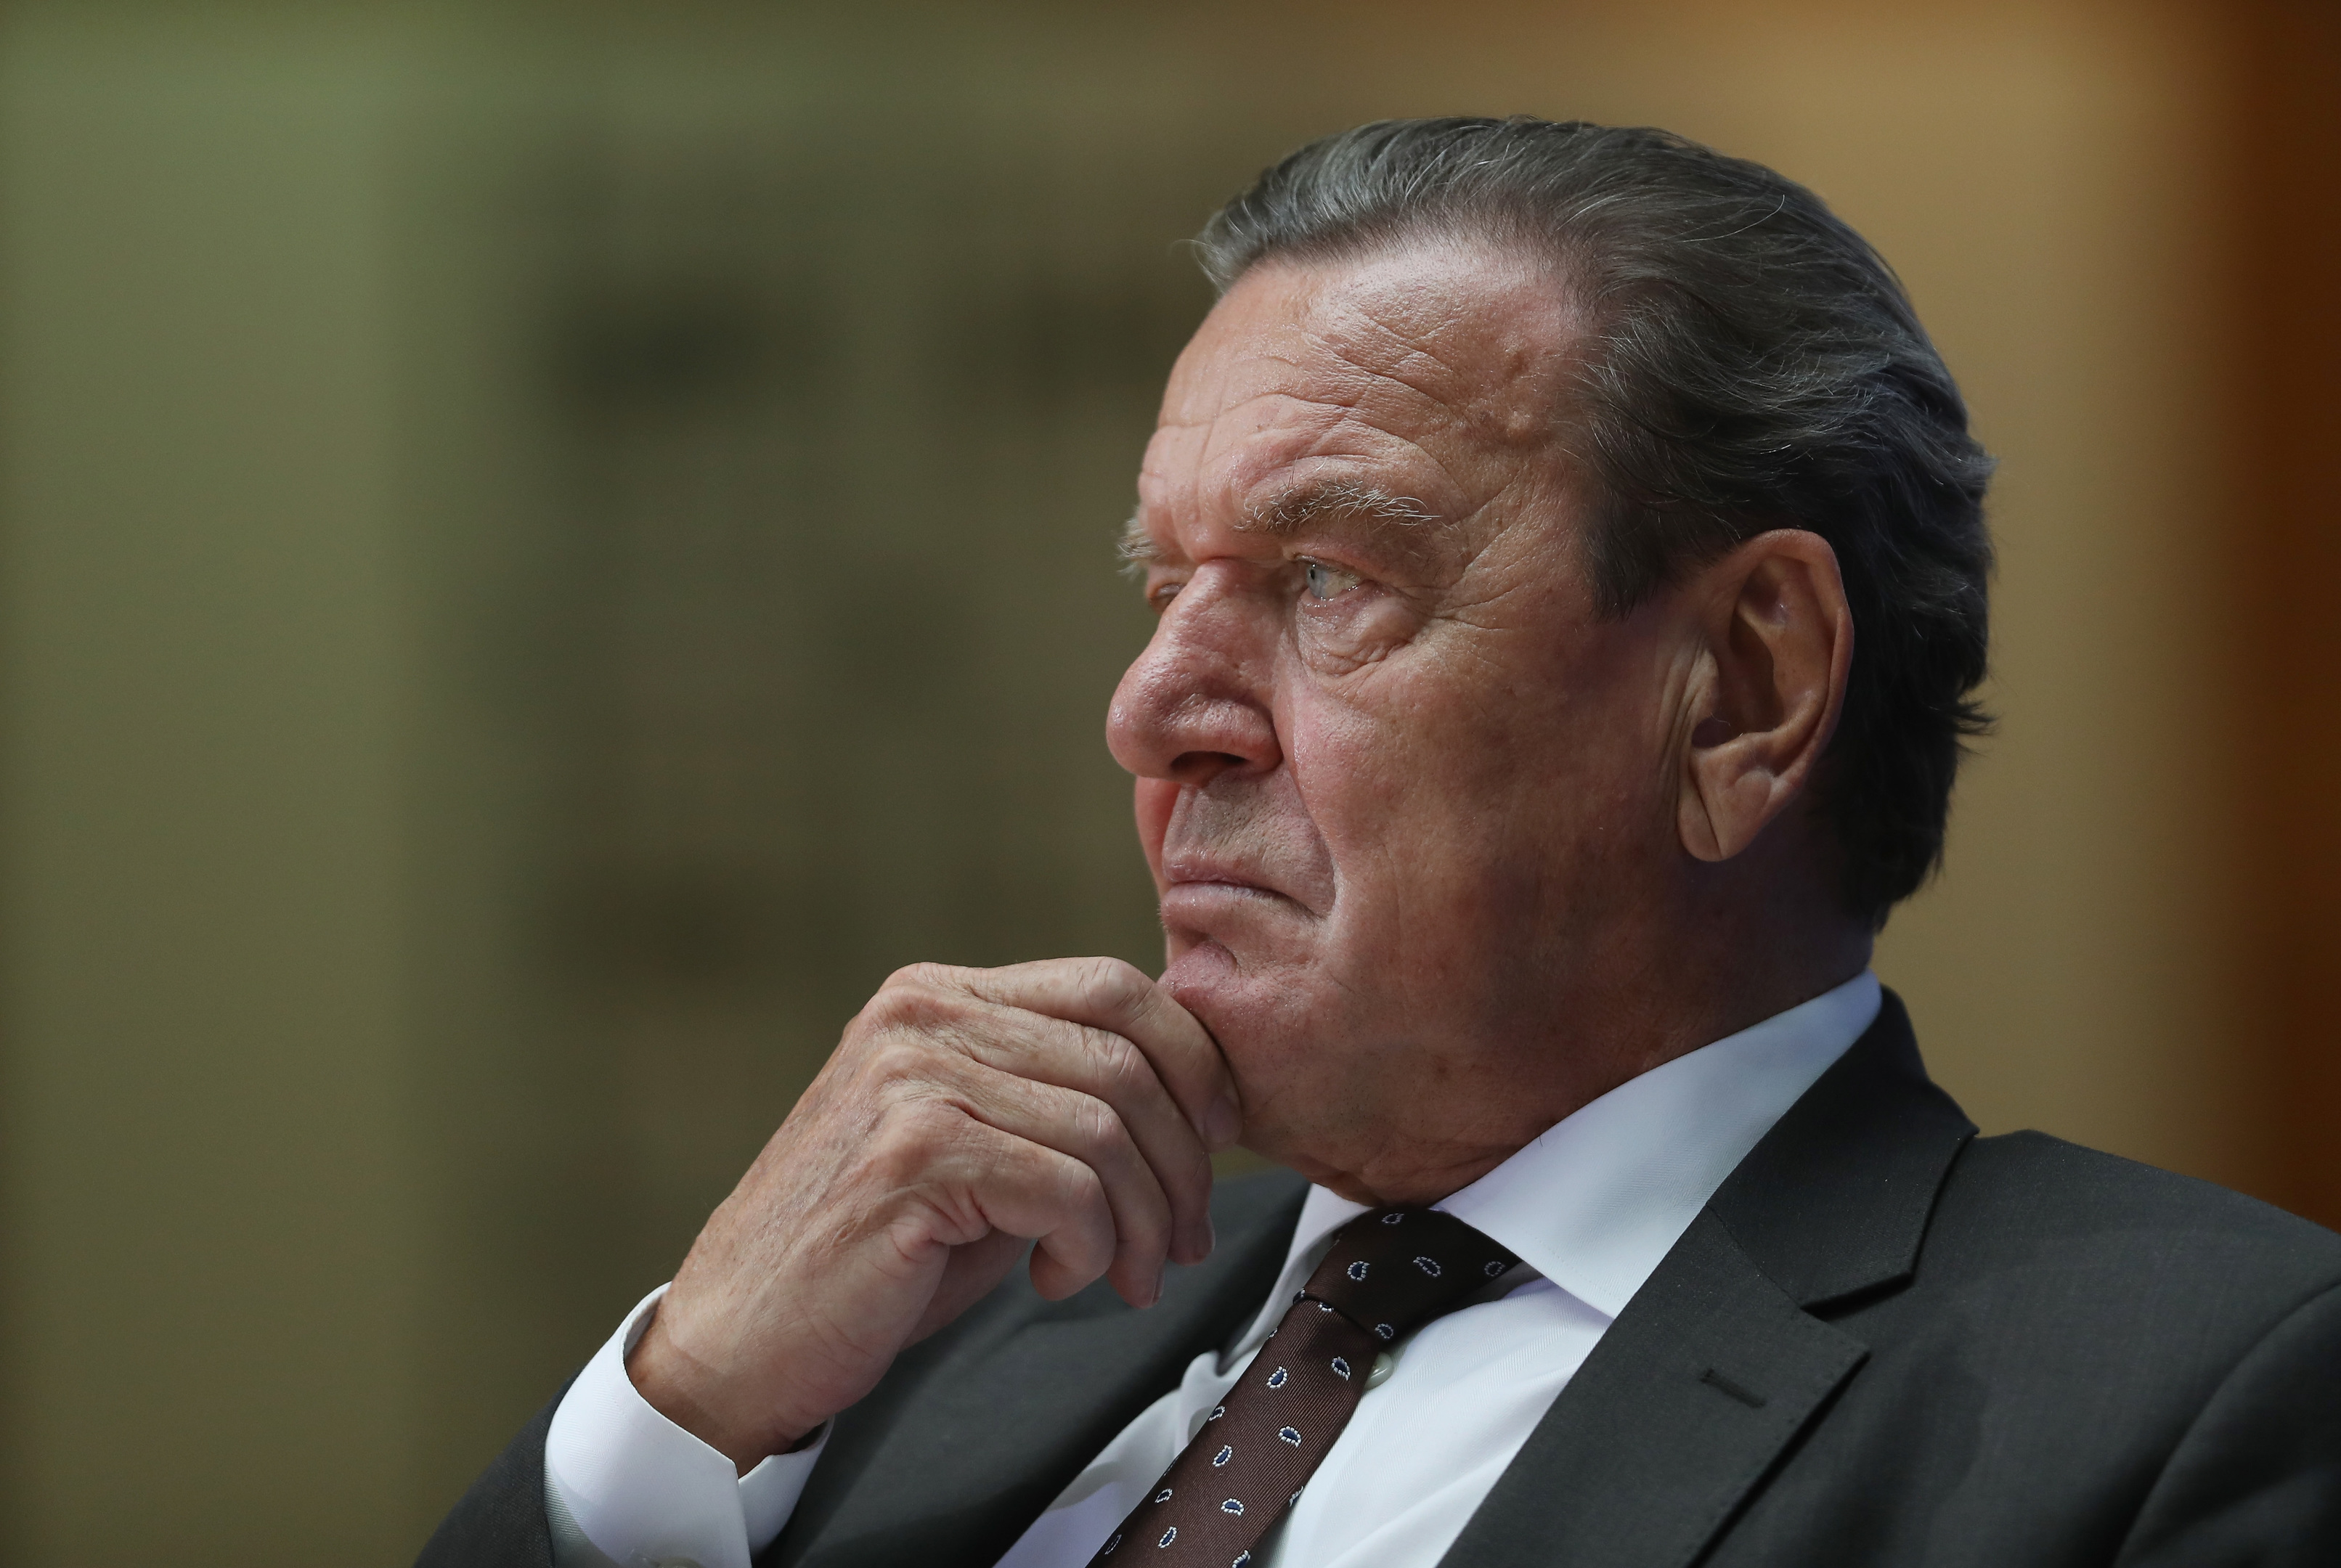 BERLIN, GERMANY - SEPTEMBER 29:  Former German Chancellor Gerhard Schroeder attends the presentation of the book: "Helmut Schmidt - The Later Years" on September 29, 2016 in Berlin, Germany. Schmidt, a Social Democrat (SPD), led Germany as chancellor from 1974 to 1982 and died last year. Schroeder, als a Social Democrat, served as chancellor from 1998 to 2005.  (Photo by Sean Gallup/Getty Images)